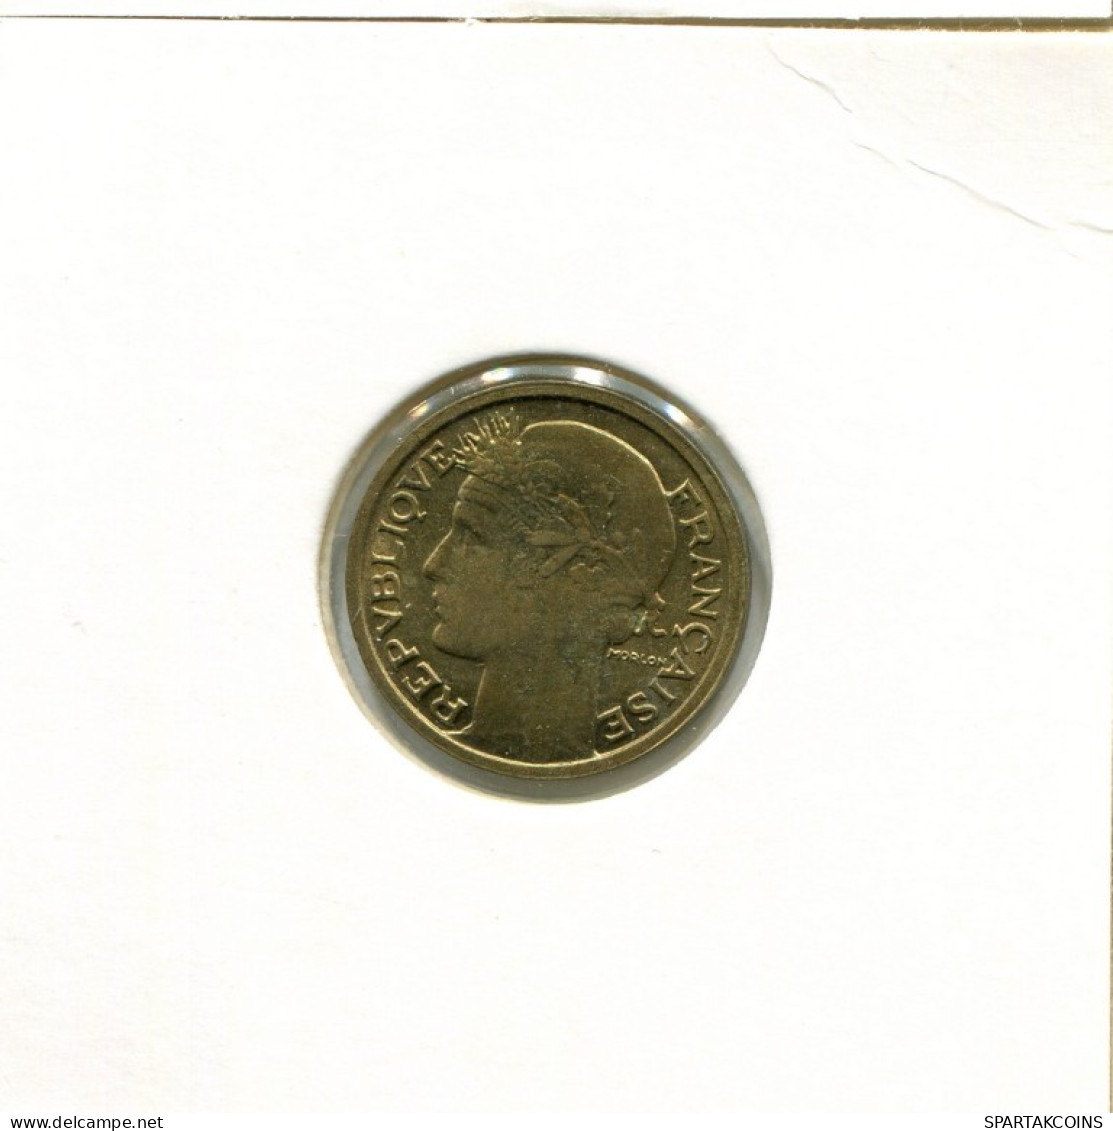 50 CENTIMES 1939 FRANCE French Coin #AK925.U.A - 50 Centimes